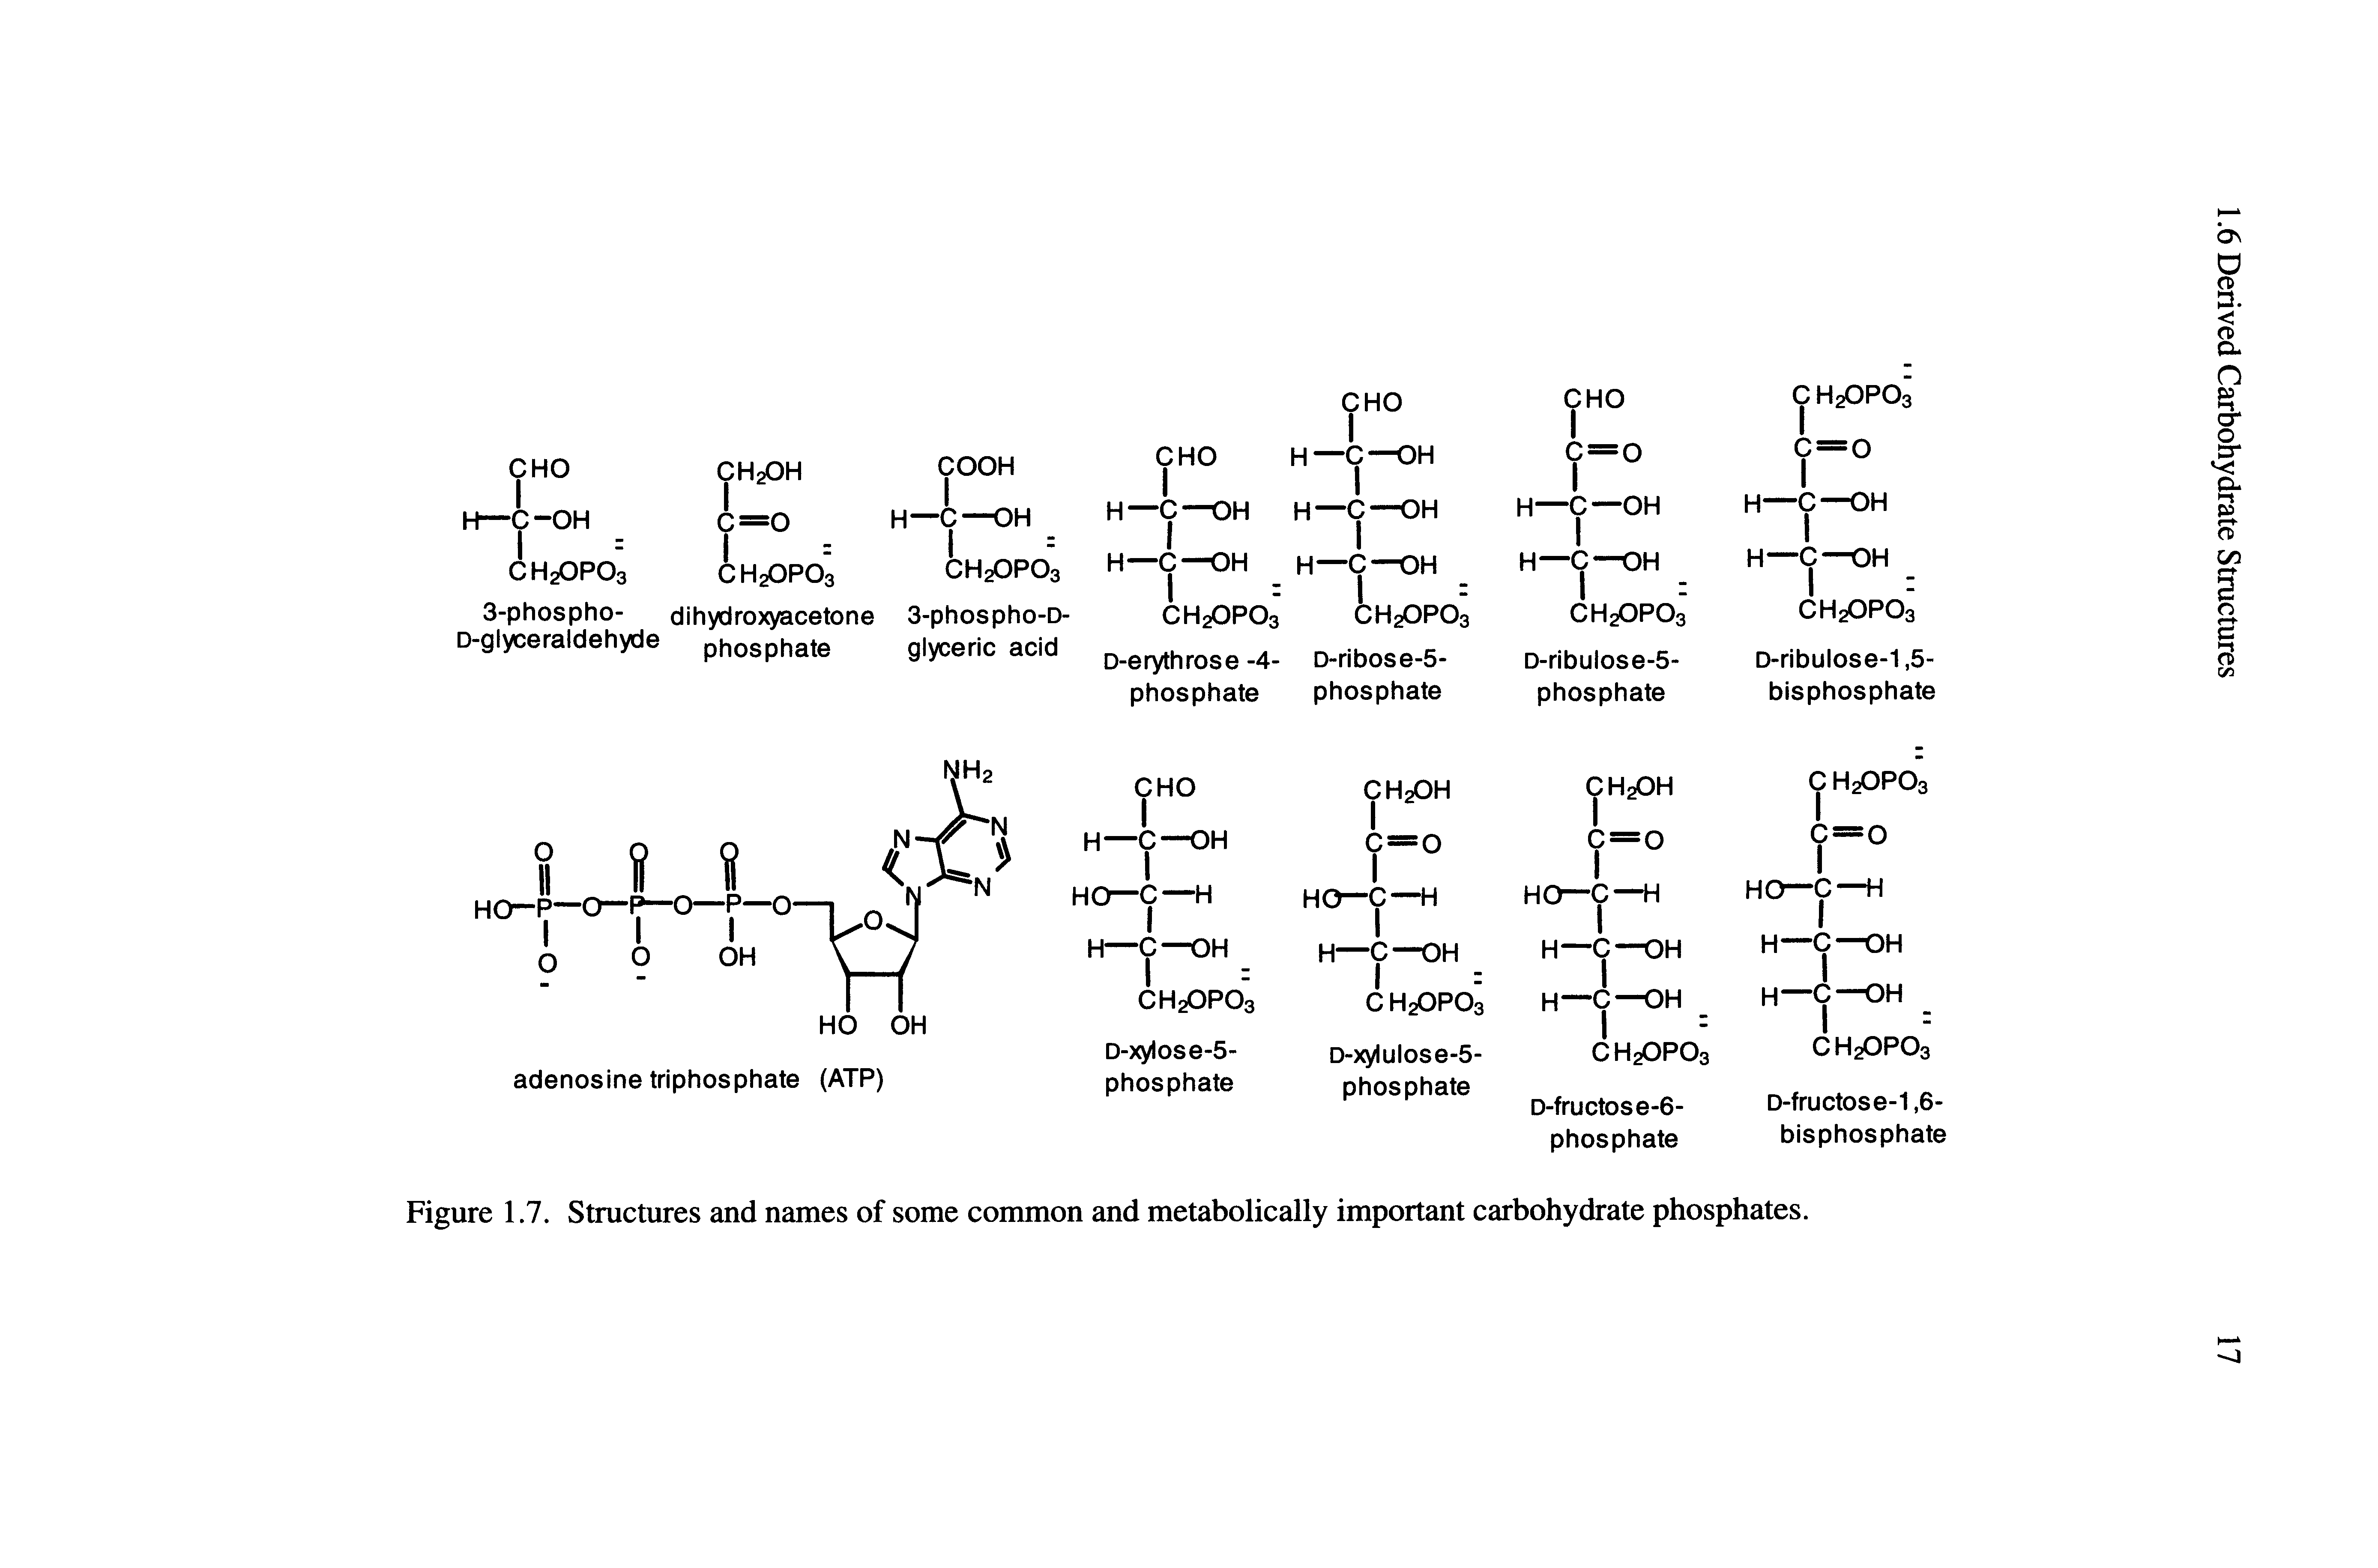 Figure 1.7. Structures and names of some common and metabolically important carbohydrate phosphates.